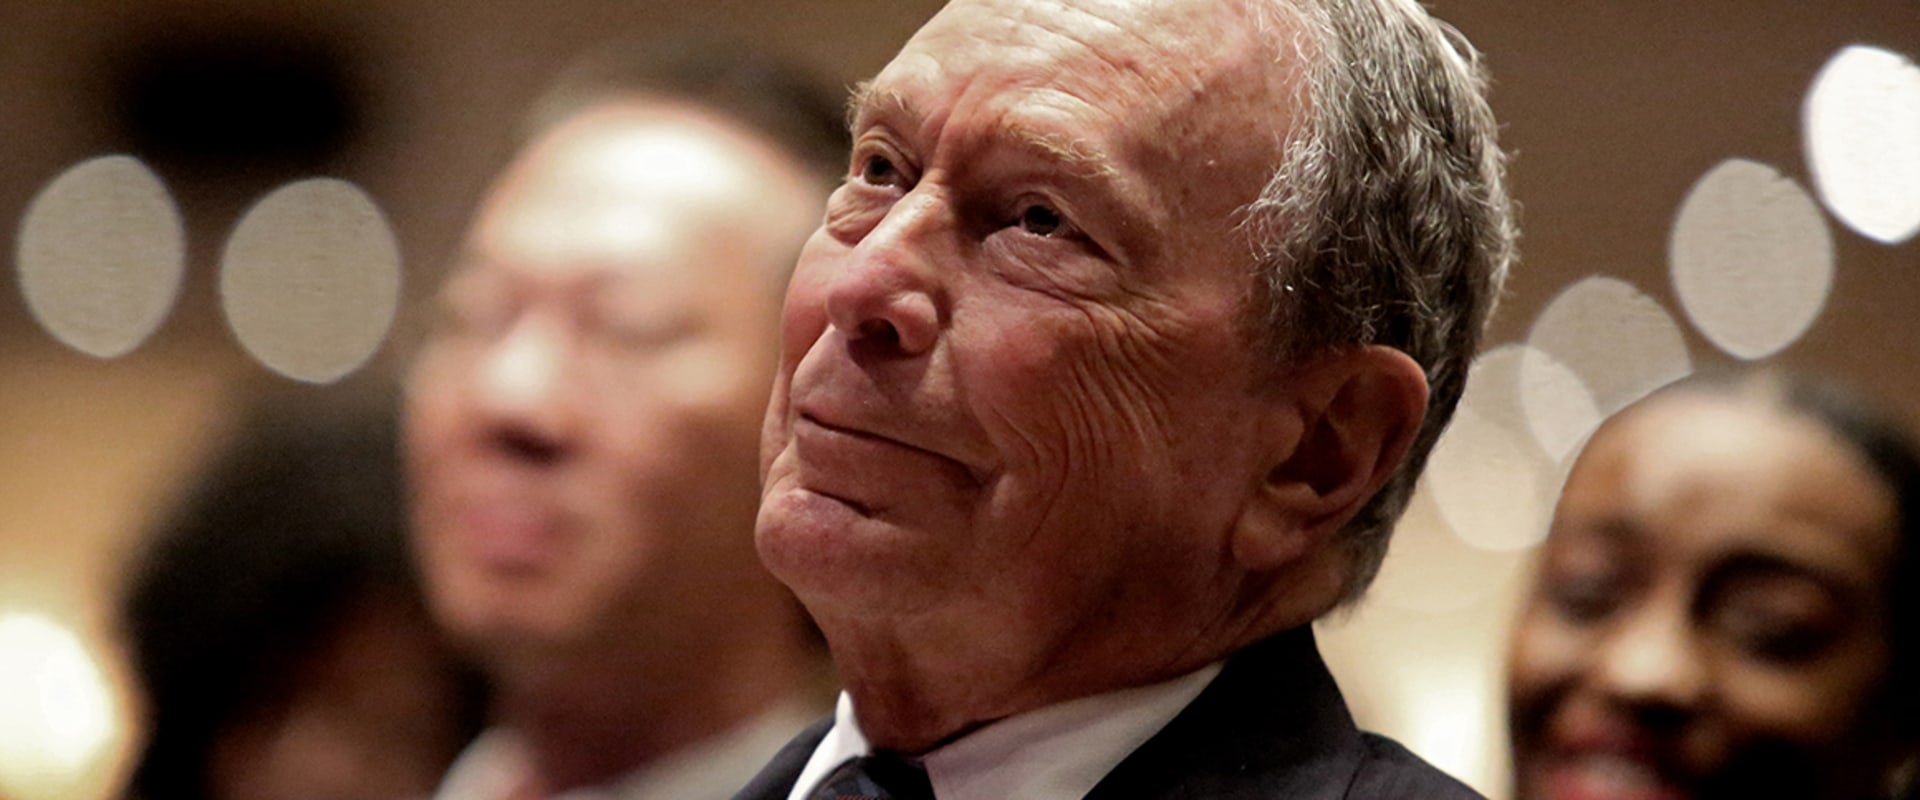 What initiatives did michael bloomberg implement during his time as mayor of new york city?